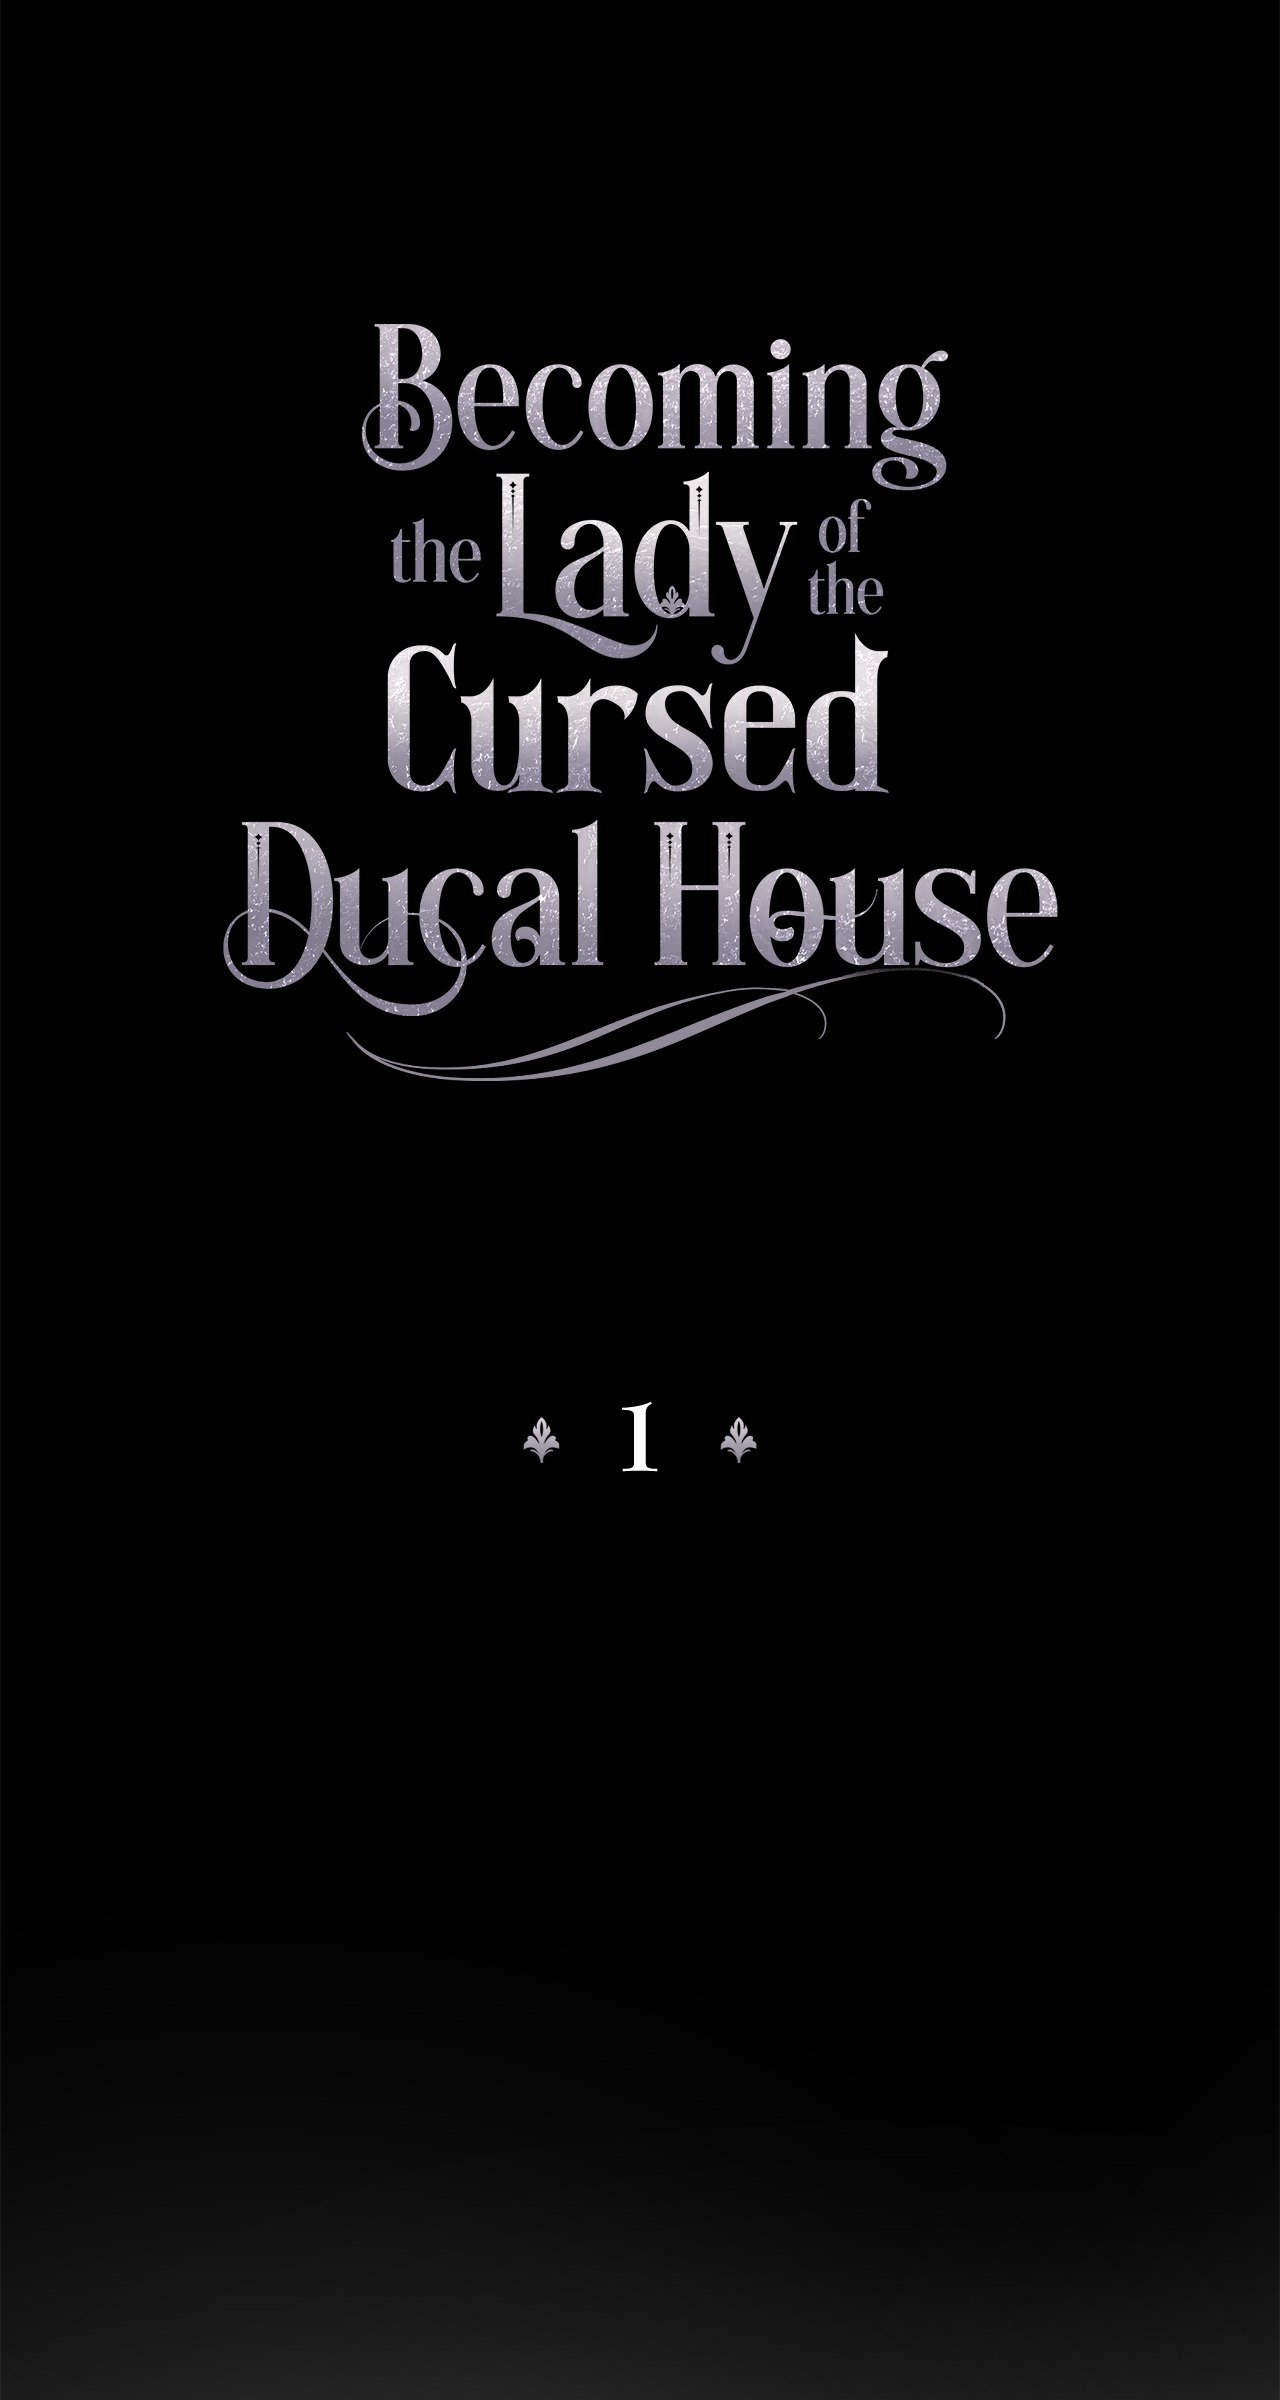 Becoming the Lady of the Cursed Ducal House chapter 1